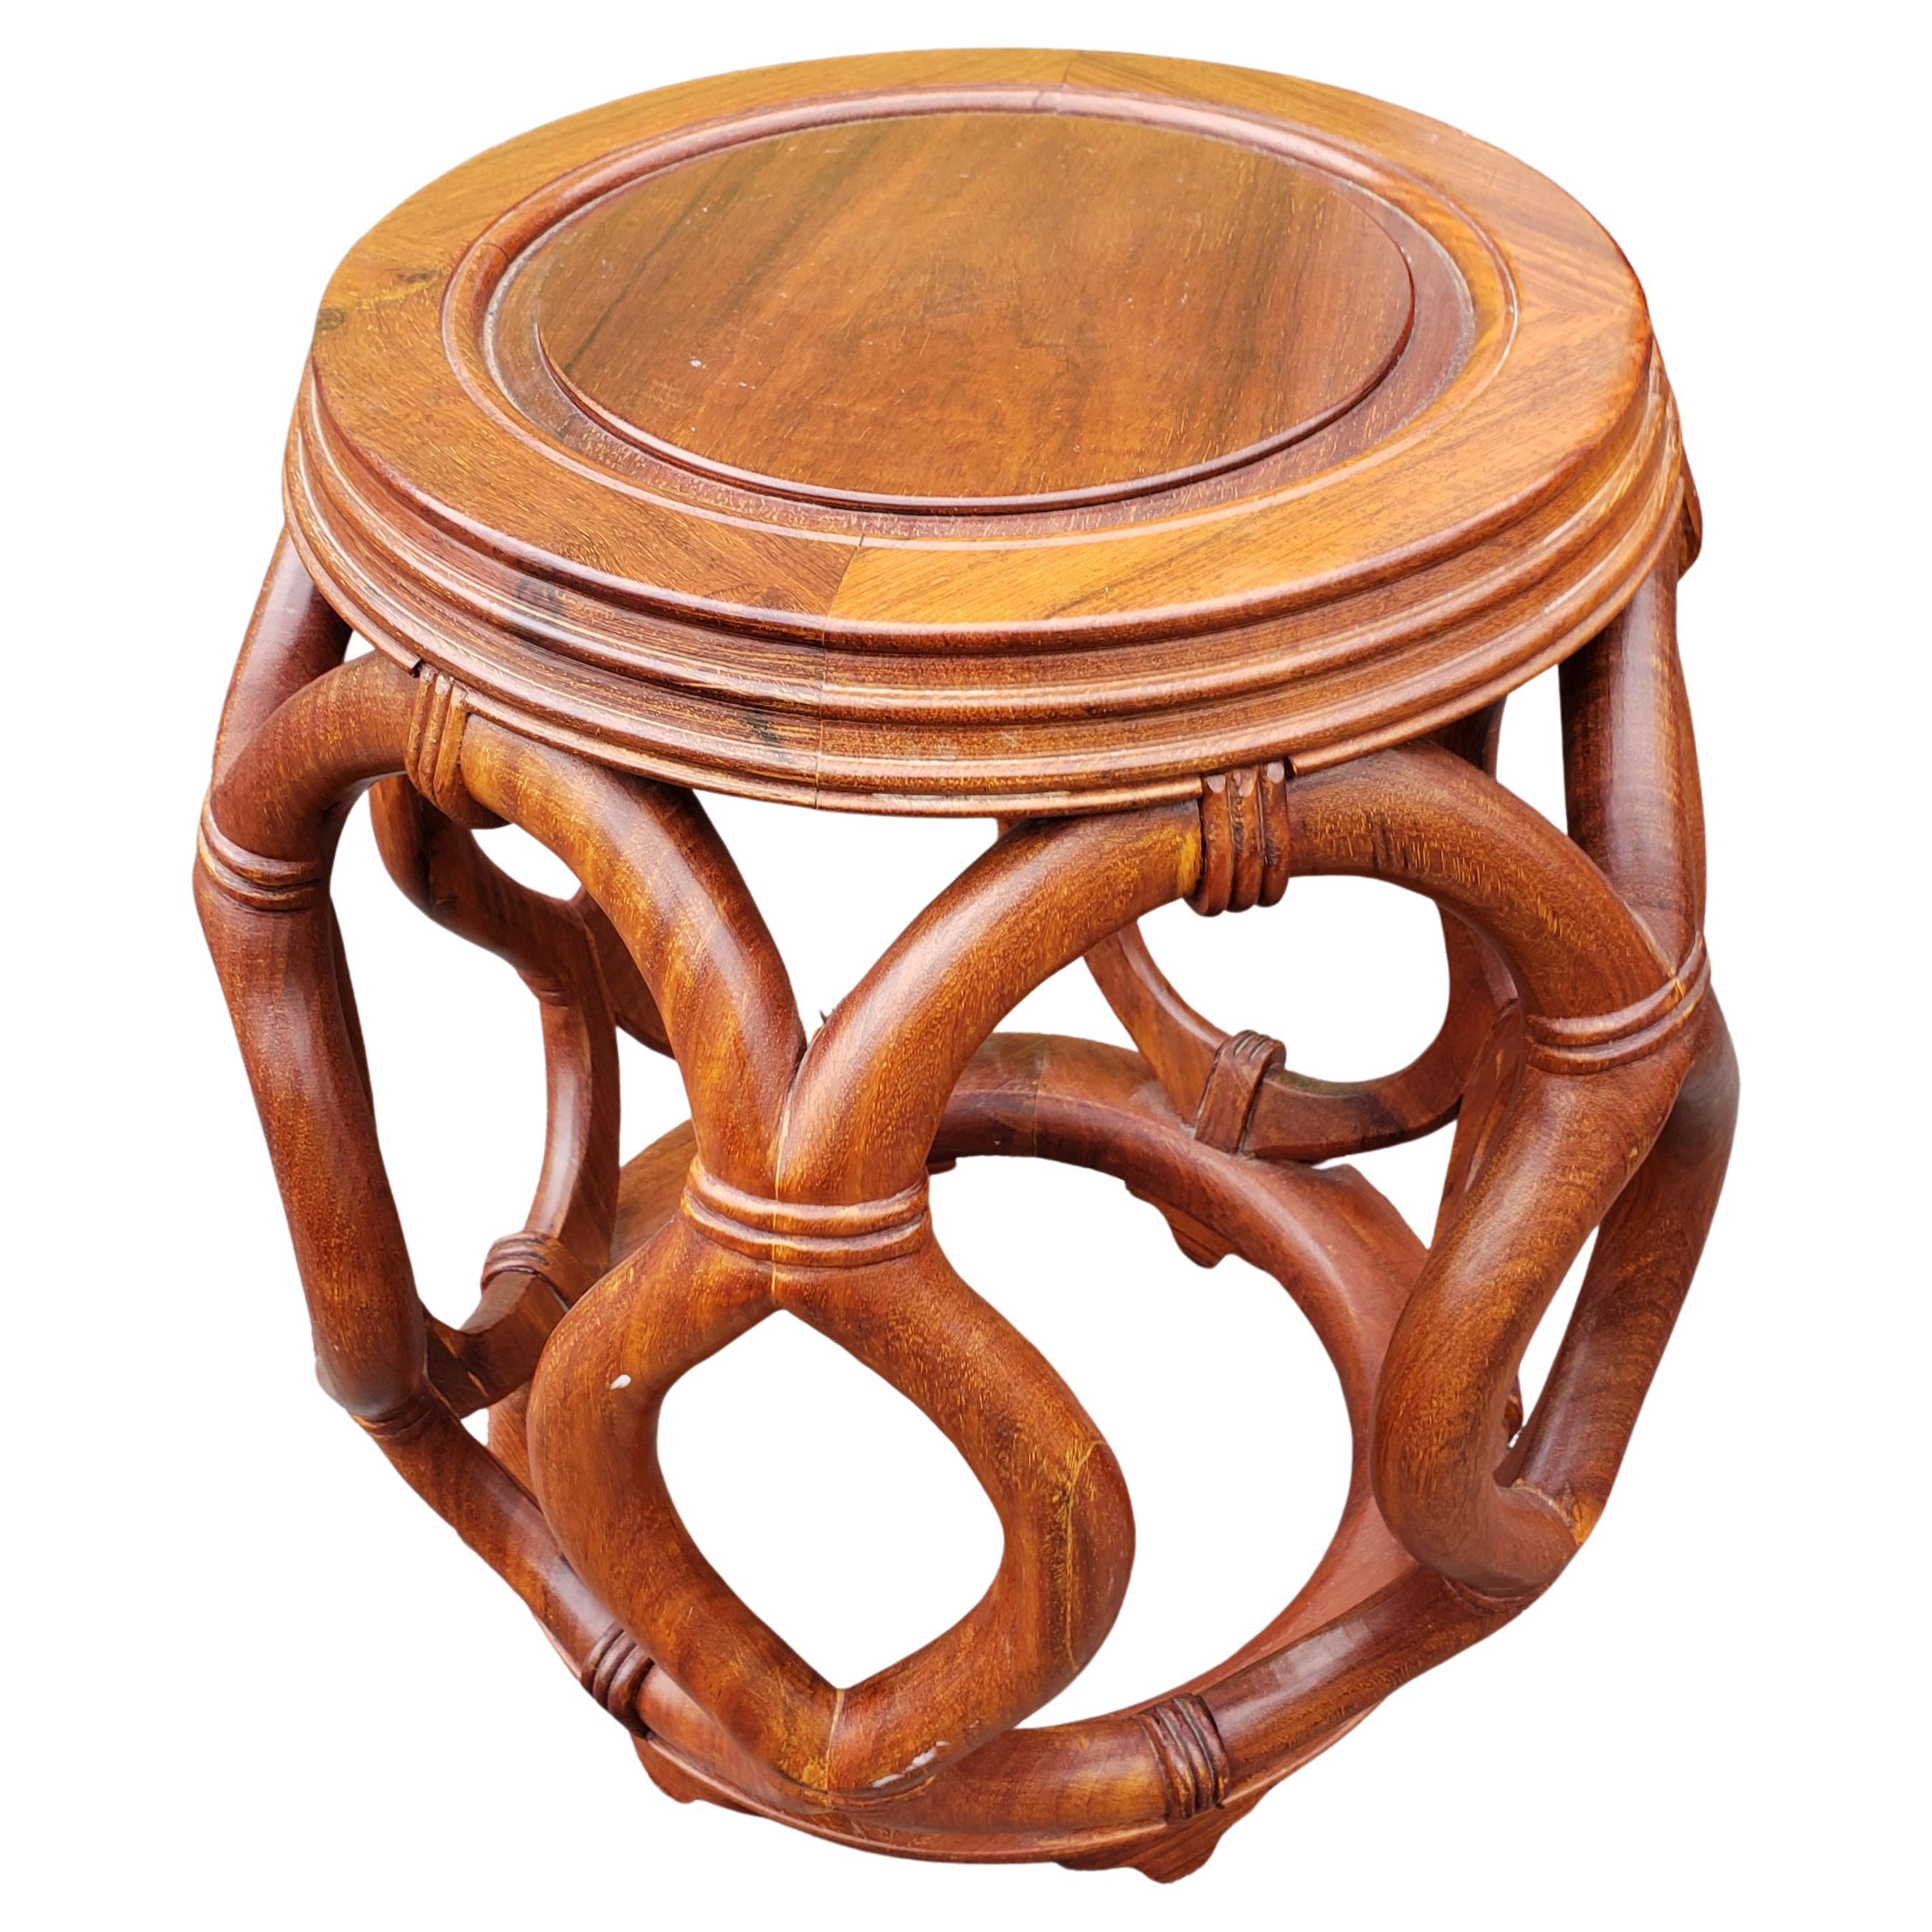 An exquisite Pair of Chinese solid Rosewood hand crafted, hand carved Faux Rattan / vine Garden Style Stools or Side Tables in great vintage condition. May be used as side tables or as stools with a perfect seat high of 18